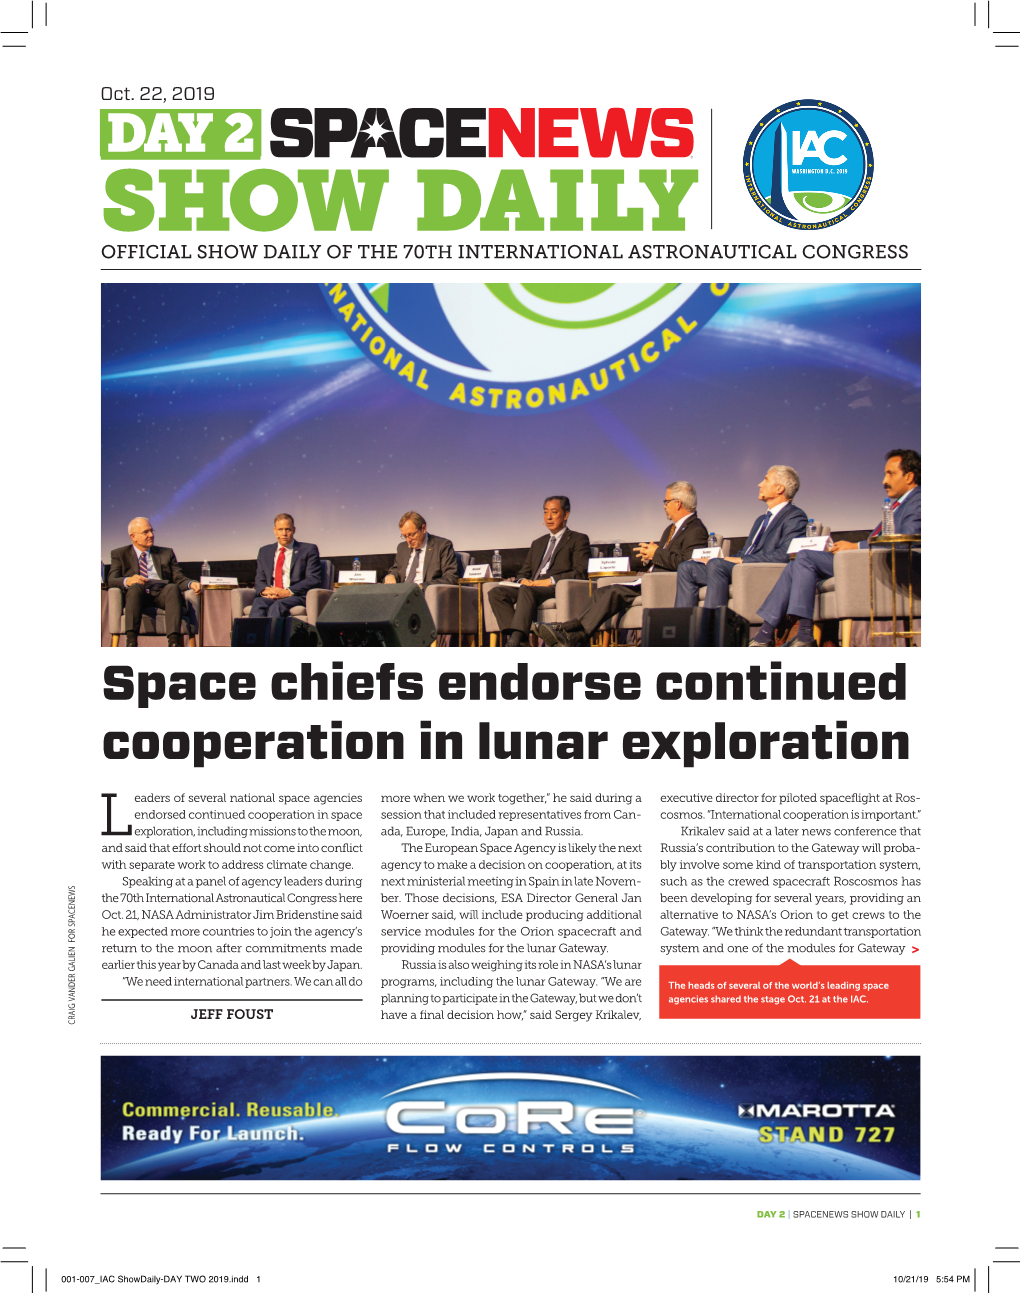 Show Daily Official Show Daily of the 70Th International Astronautical Congress